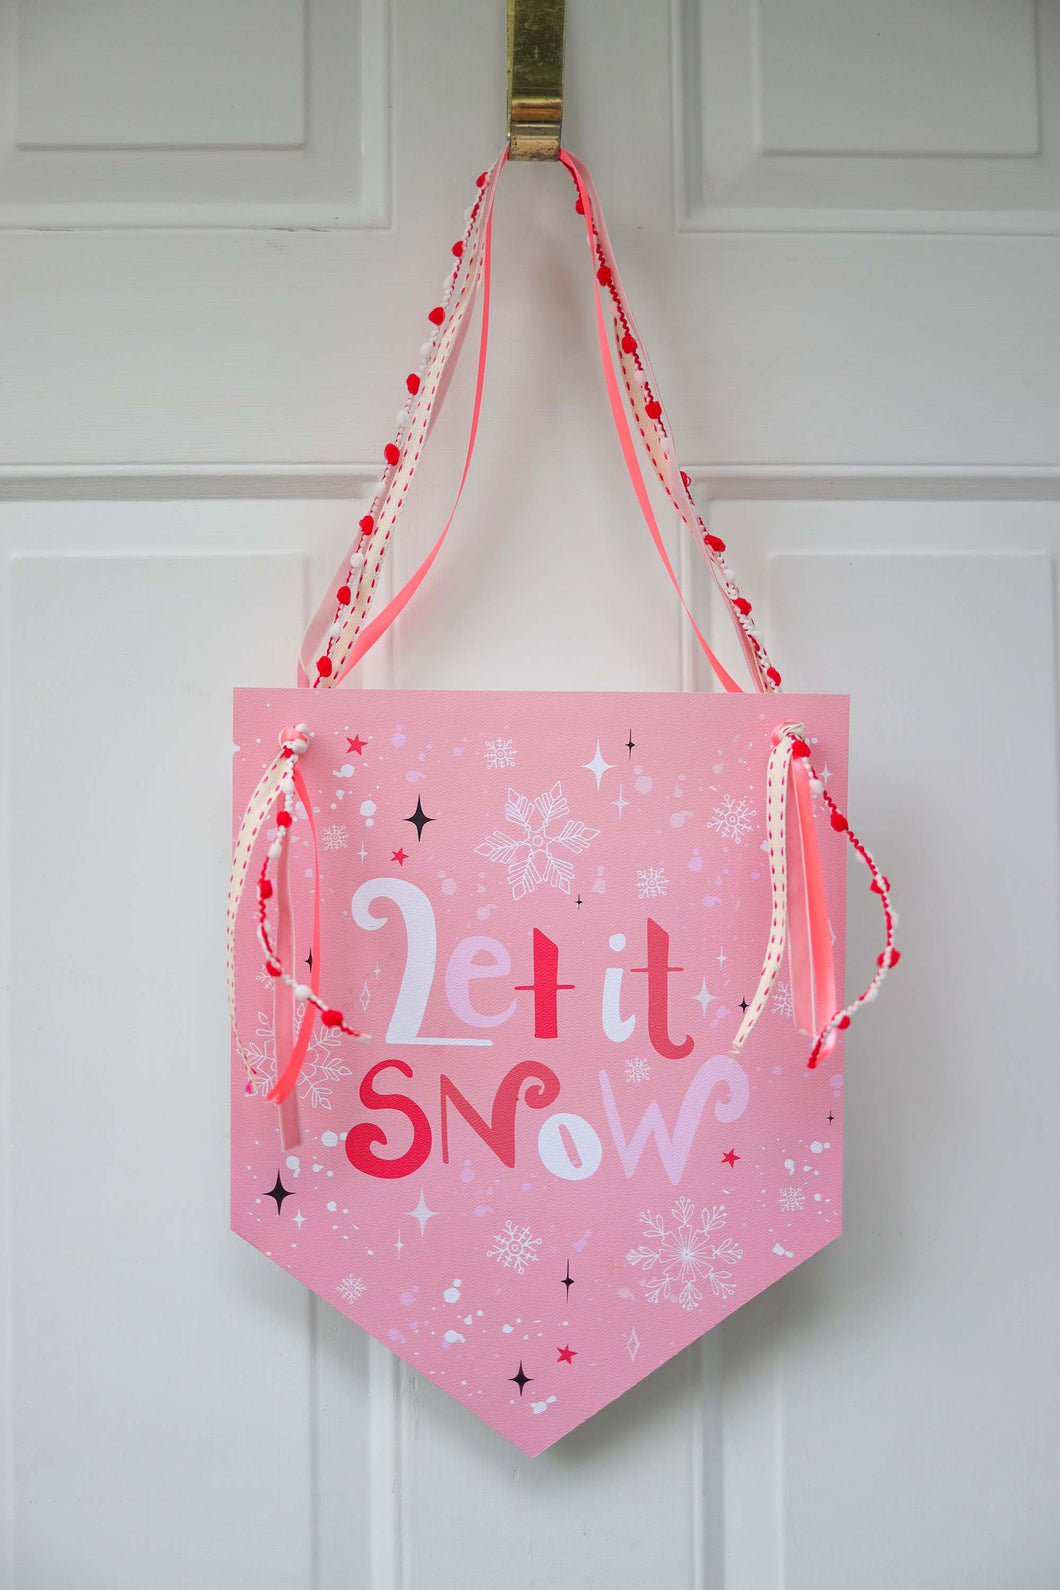 Stephanie Tara Stationery - Let it snow holiday welcome banner wall decor